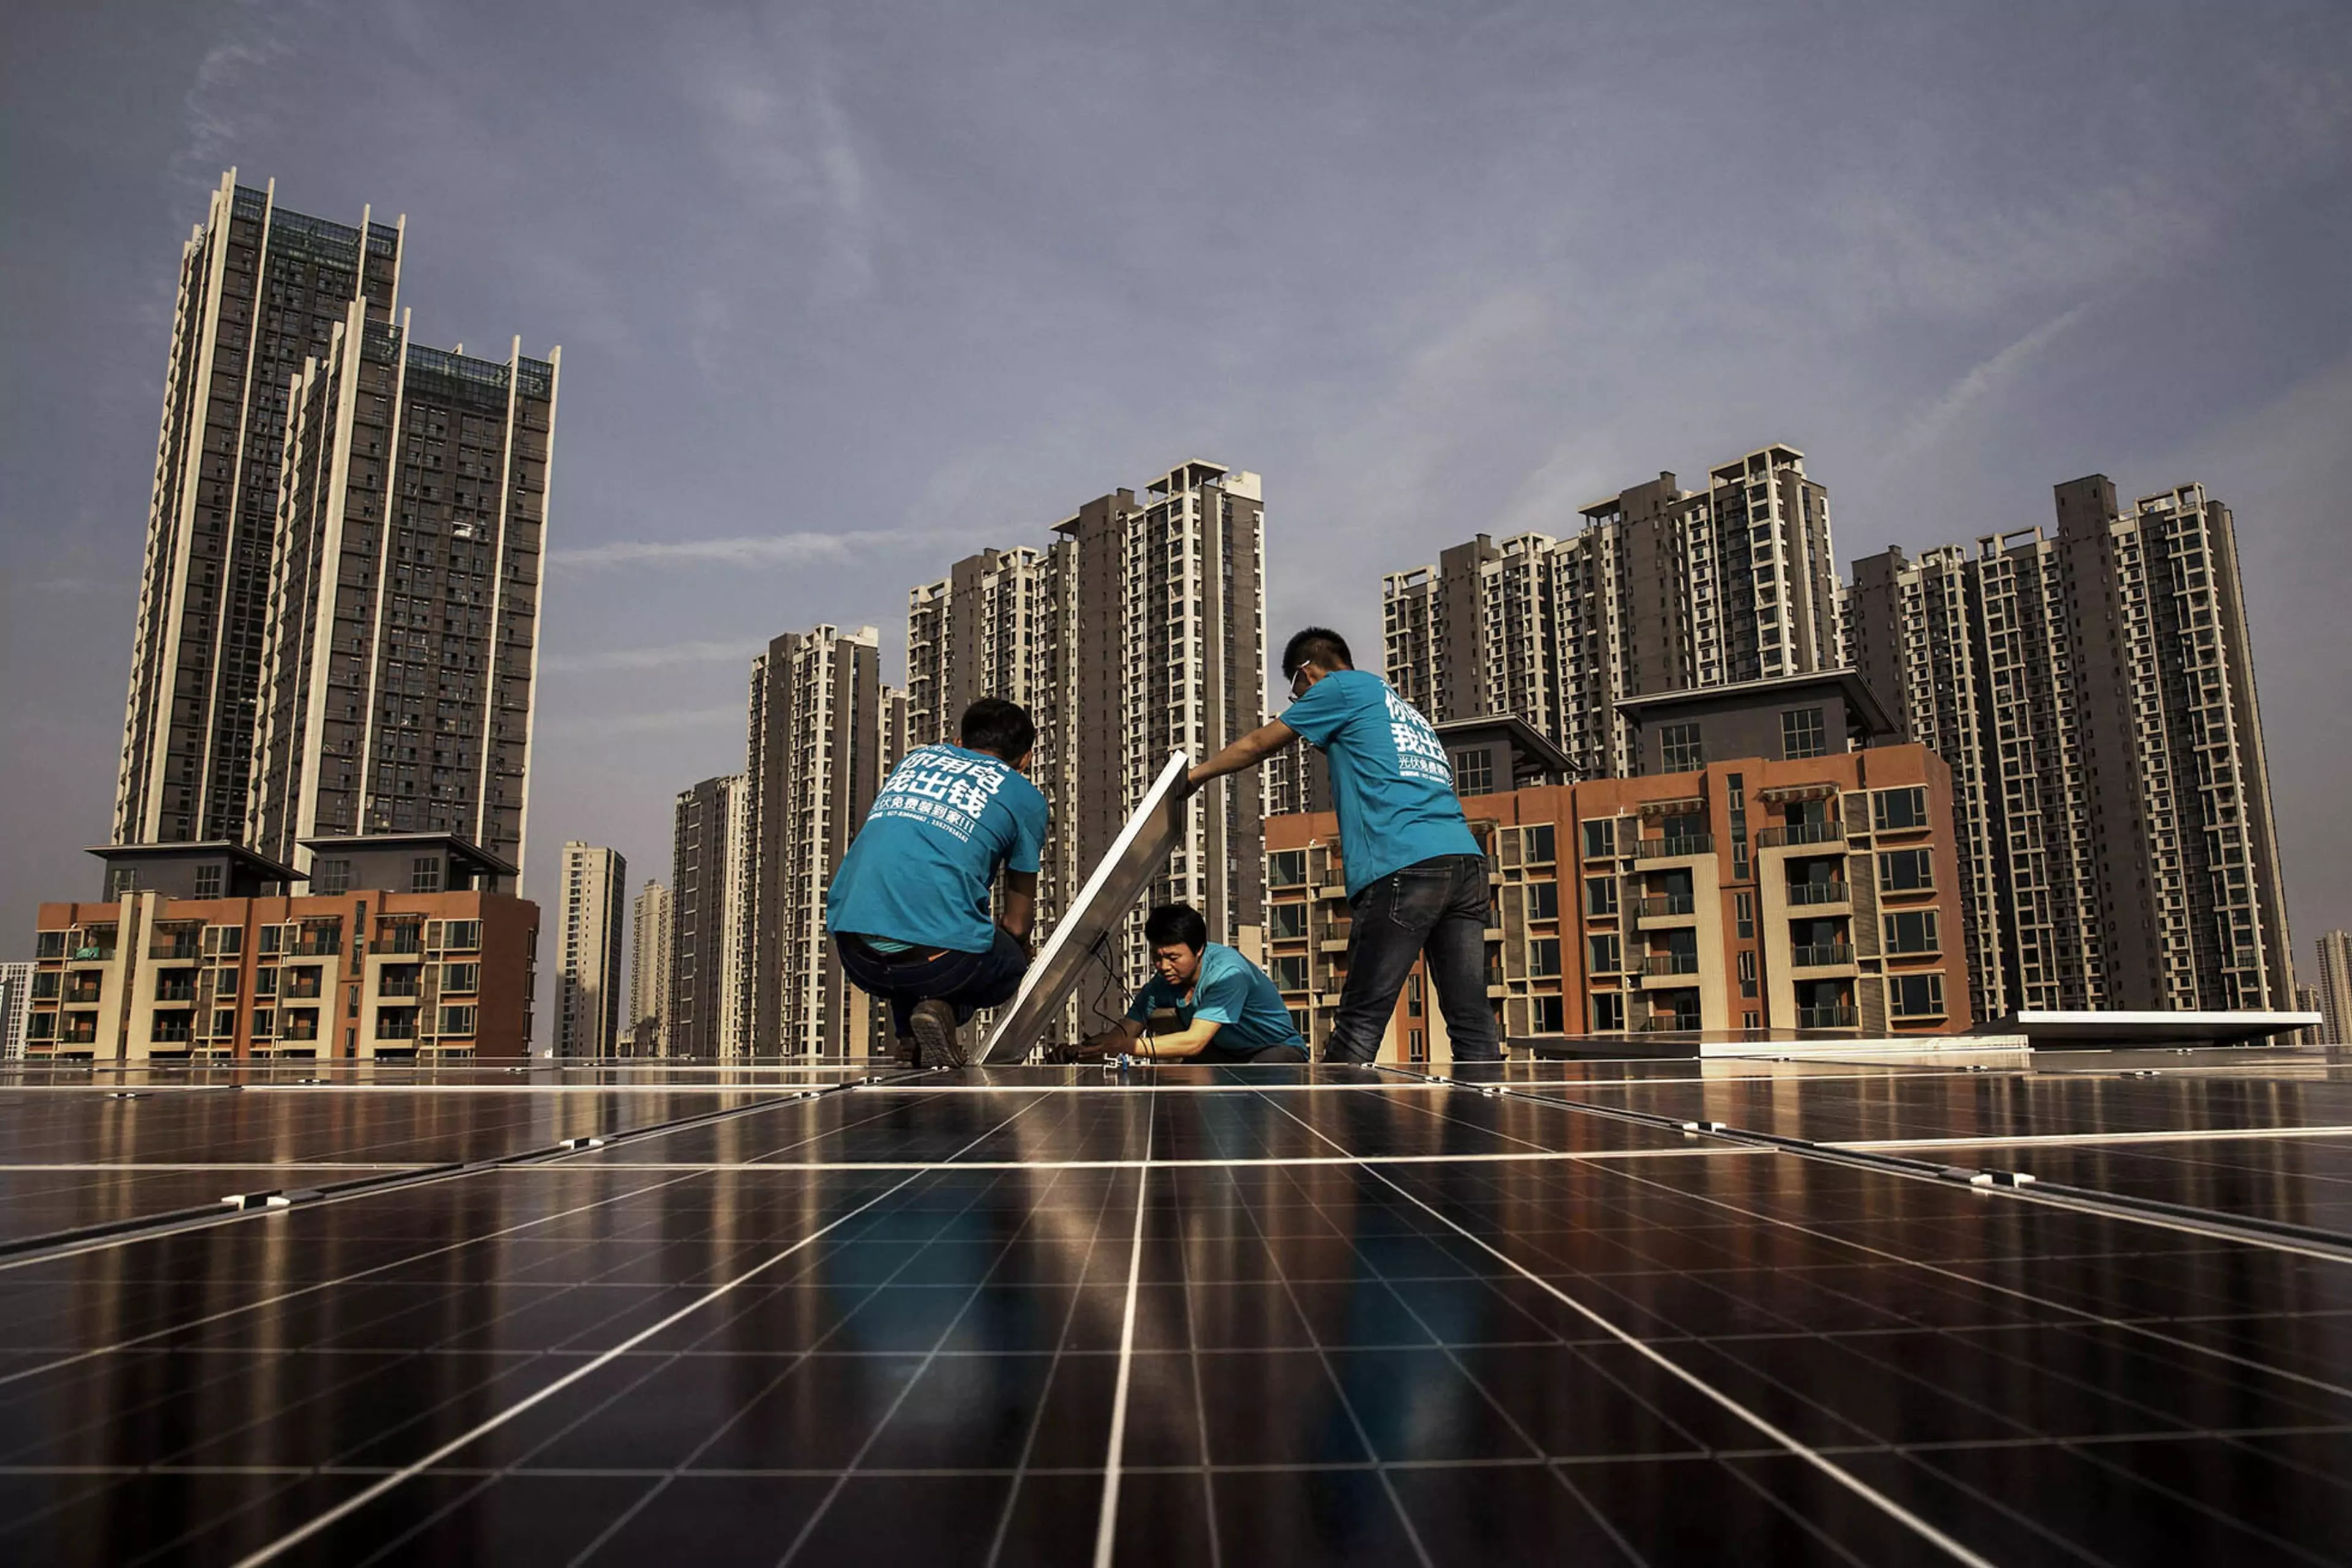 Workers install solar panels on a building’s roof in China.